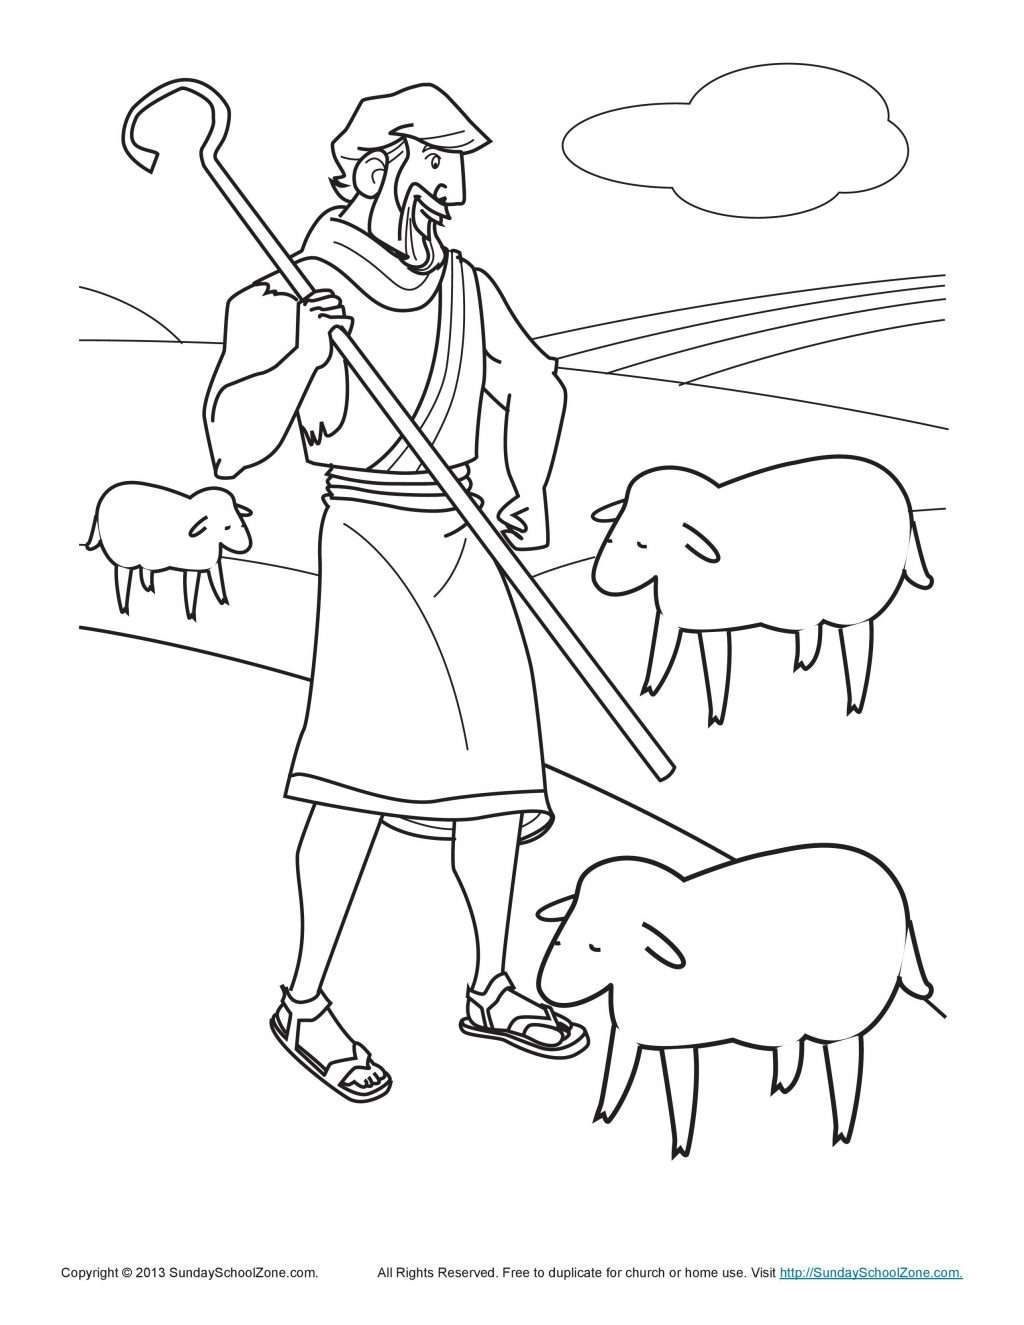 Coloring Pages Sheep And The Shepherd Coloring Ideas Bible Coloring Pages For Kids The Parable Of Lost